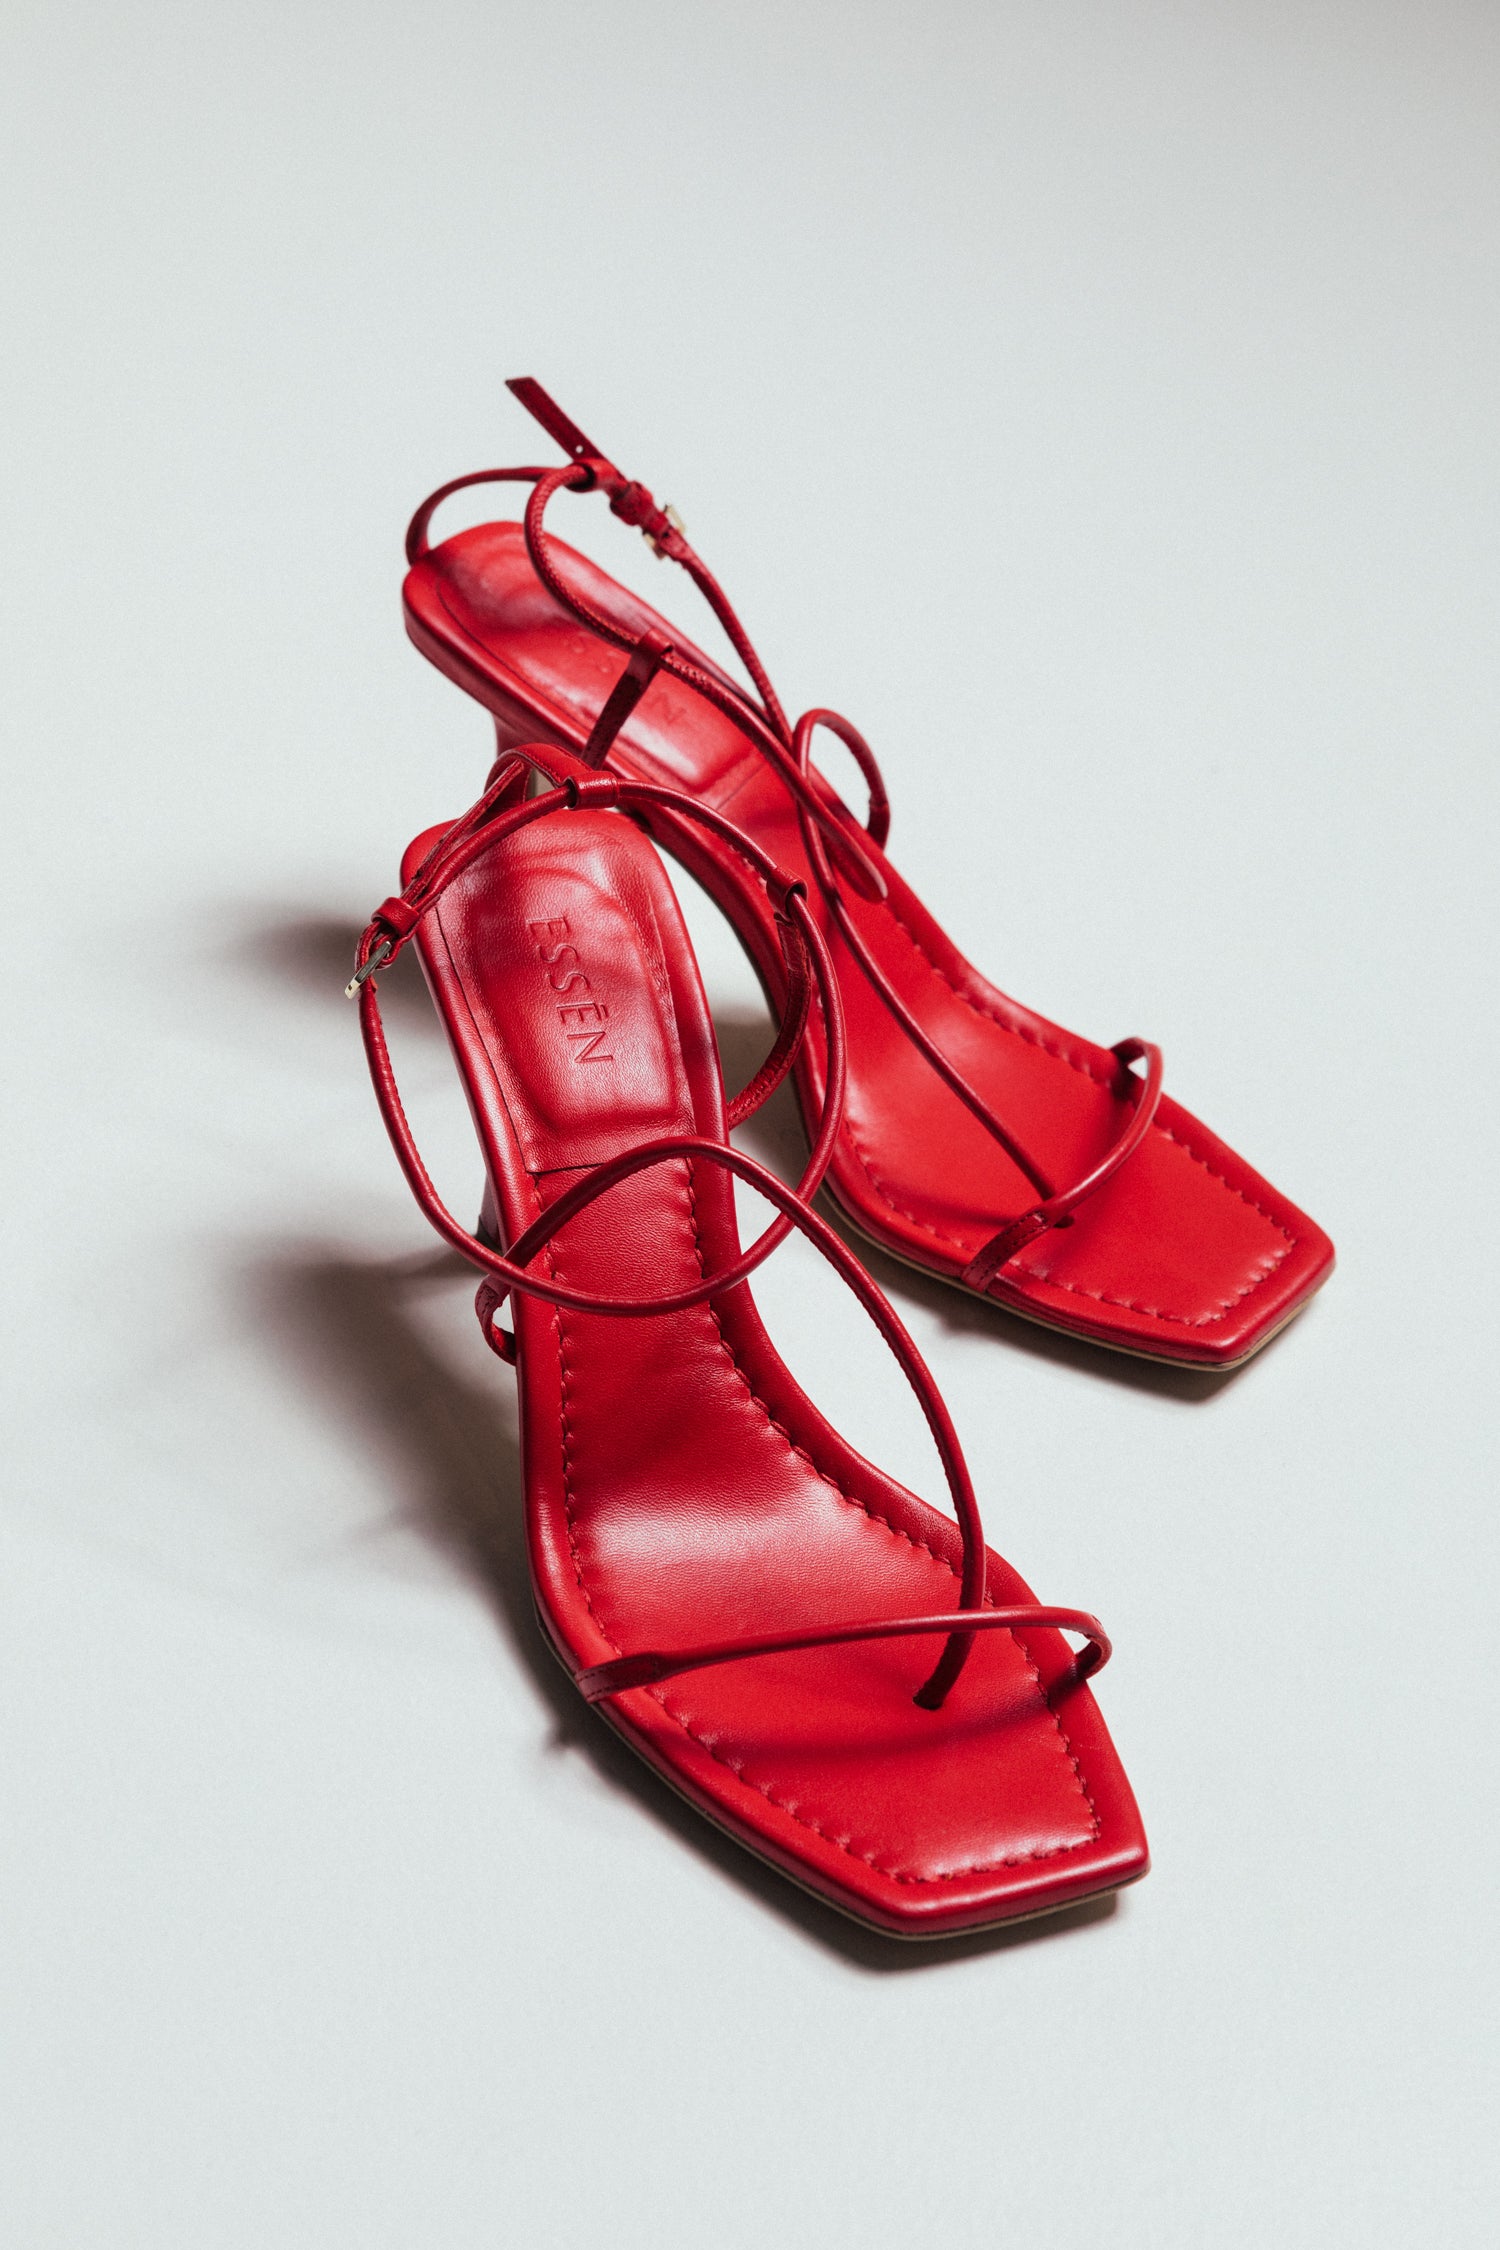 The Strappy Sandal - Red (PRE-ORDER)